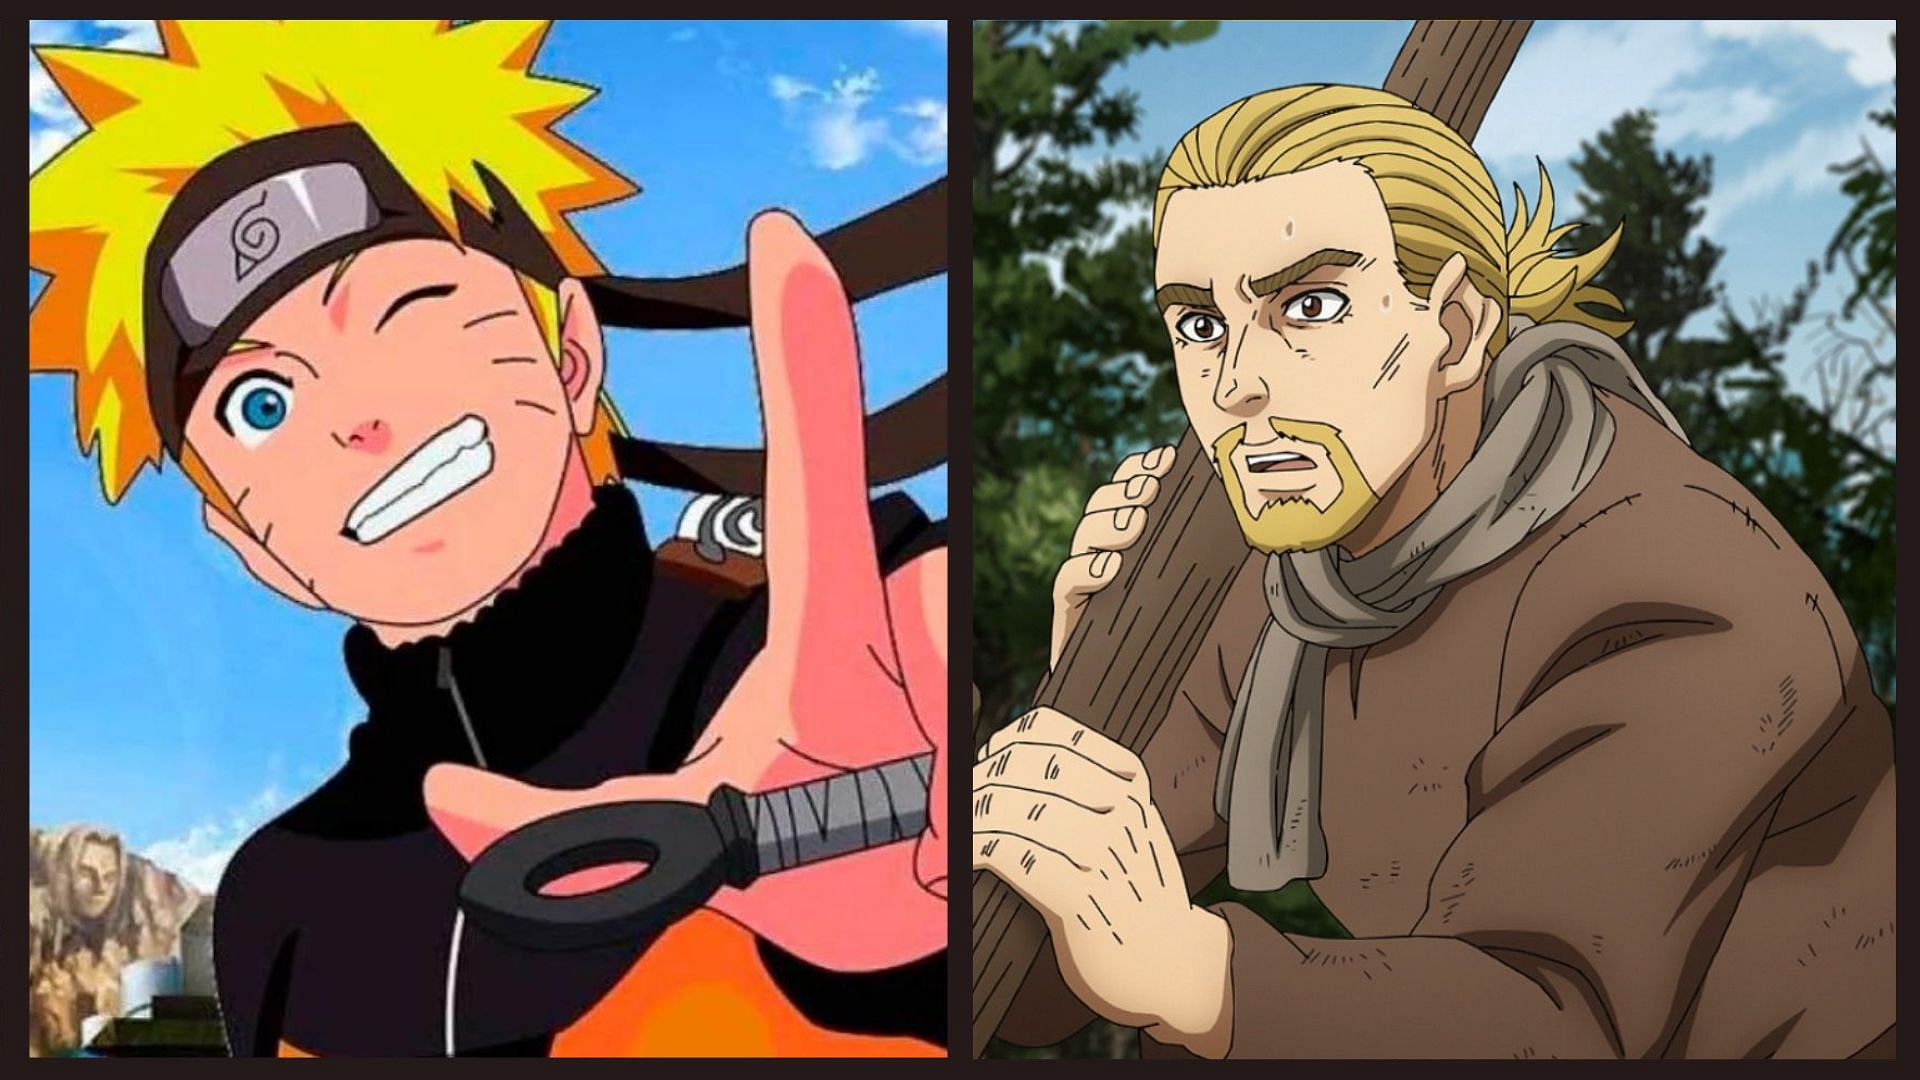 Naruto and Vinland Saga fans argue over who has the better protagonist